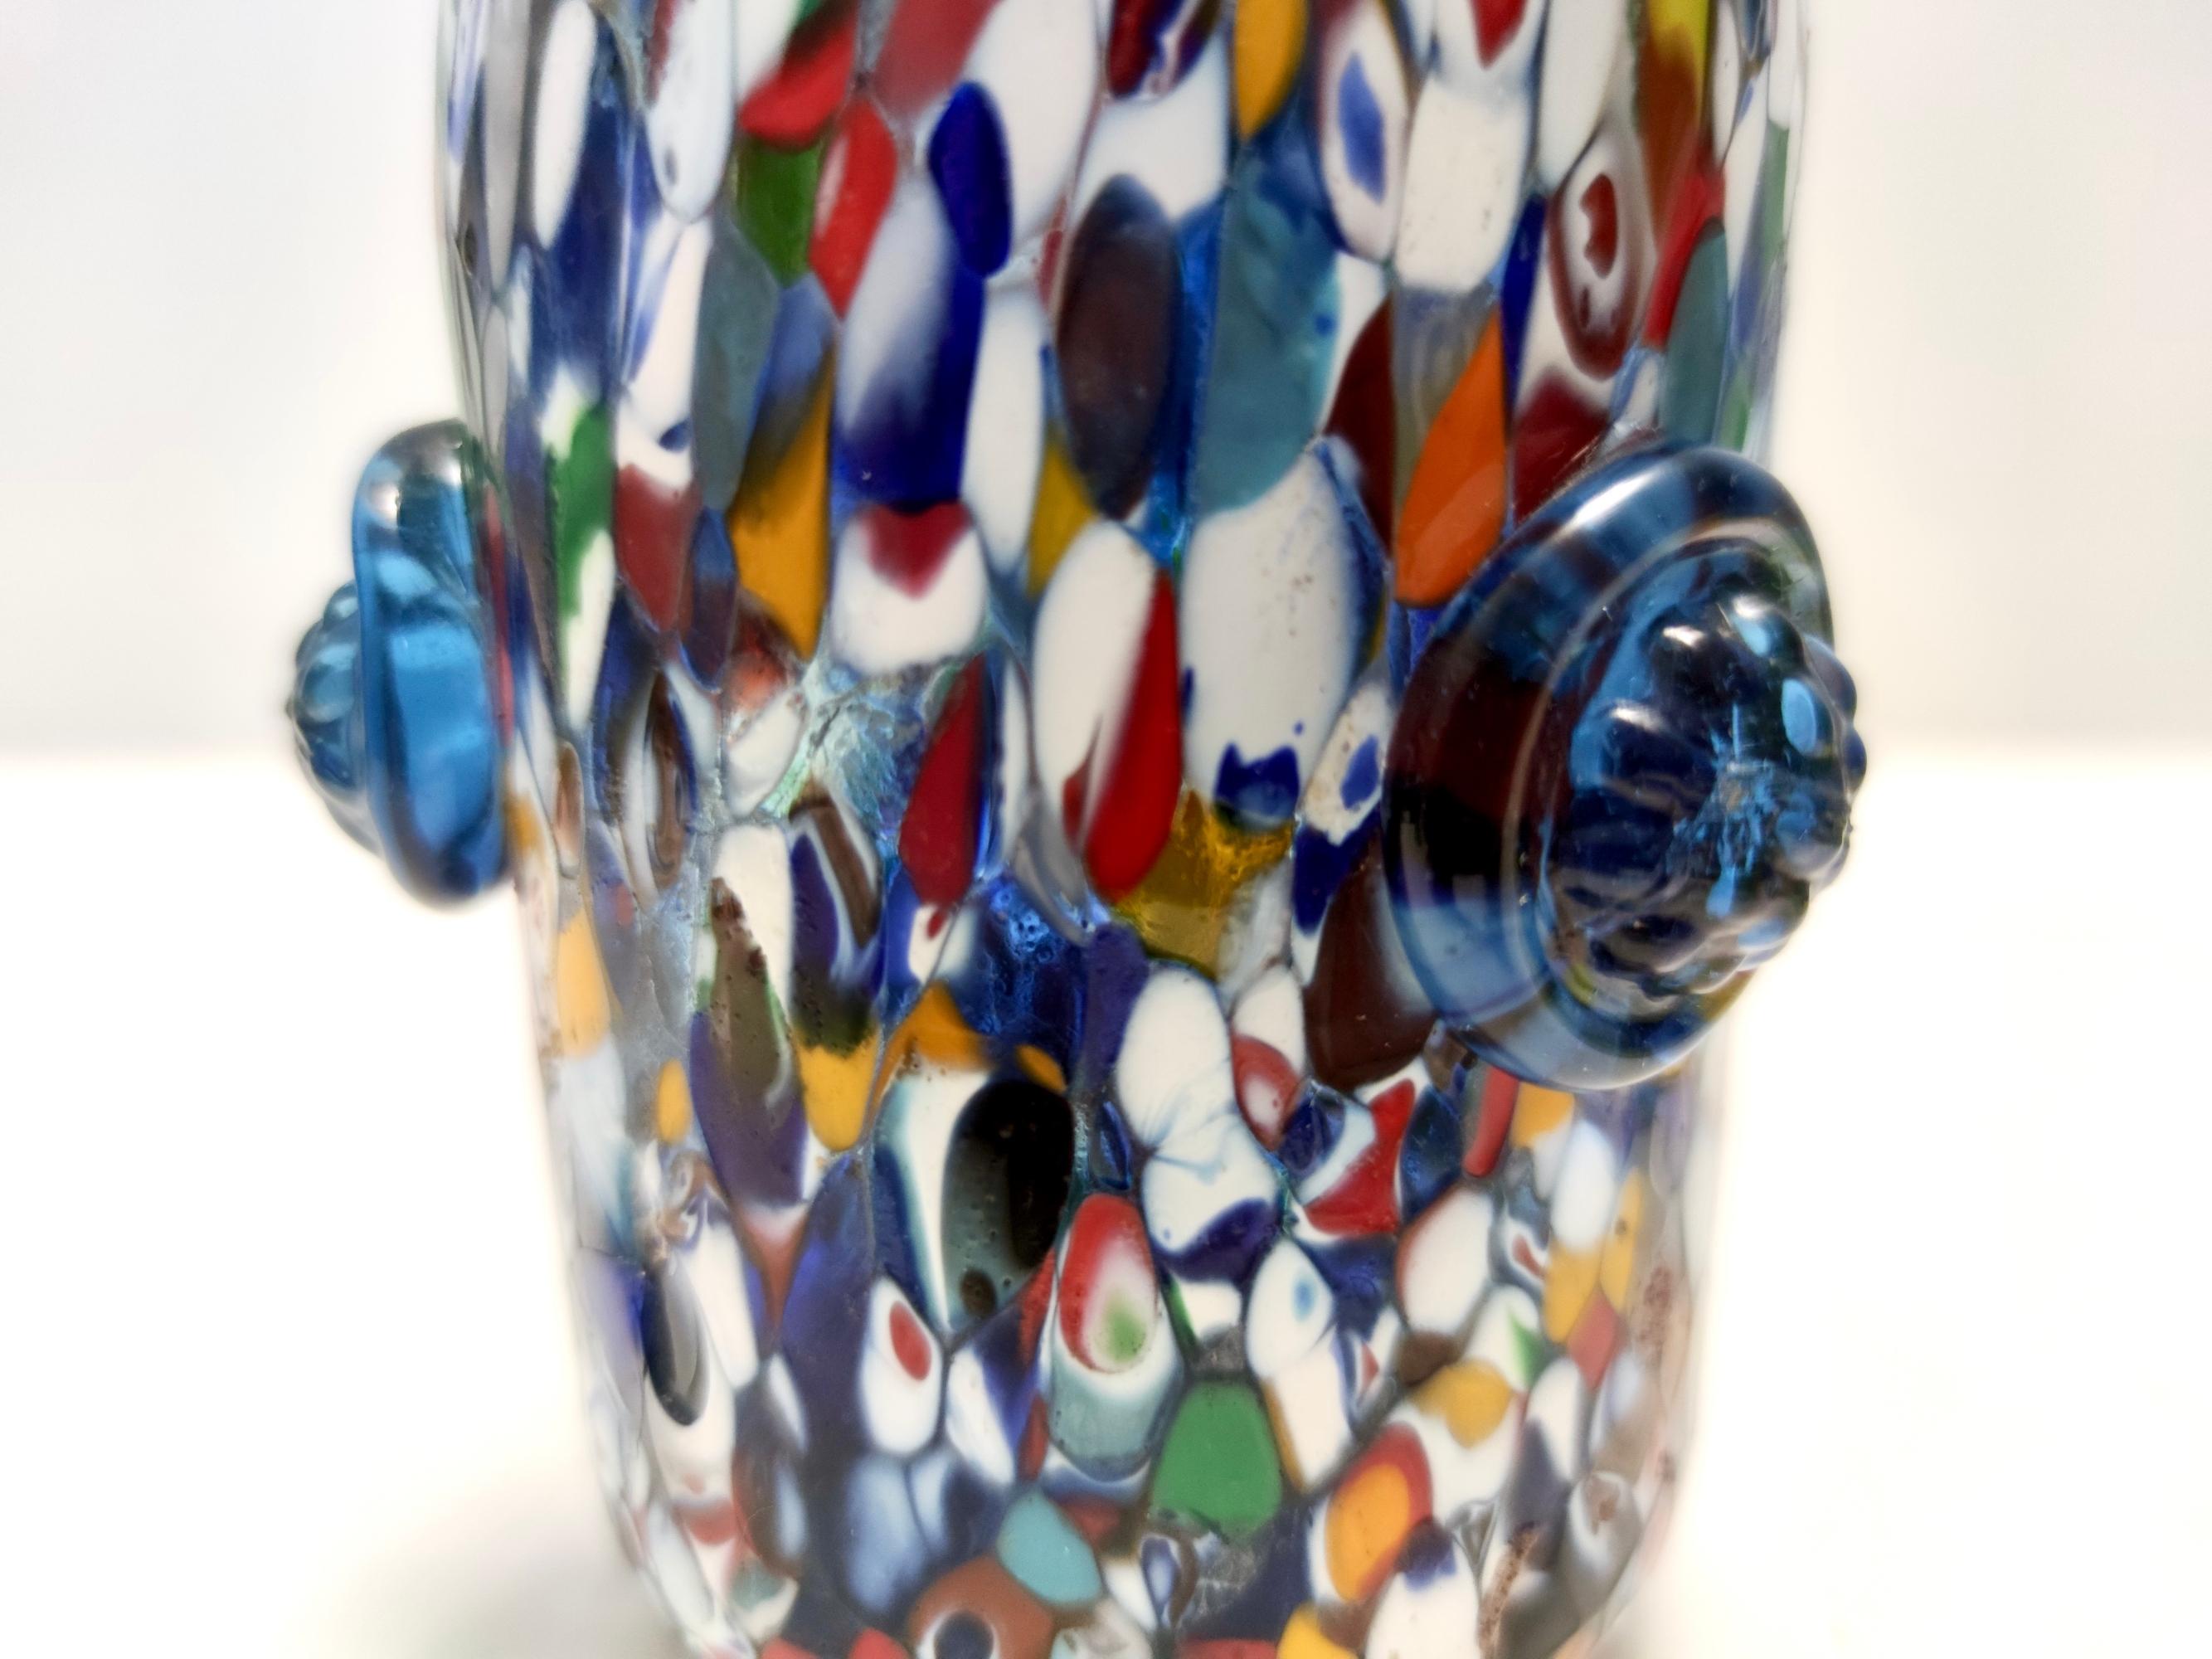 Vintage Murano Glass Vase Attributed to Fratelli Toso with Murrines, Italy For Sale 1